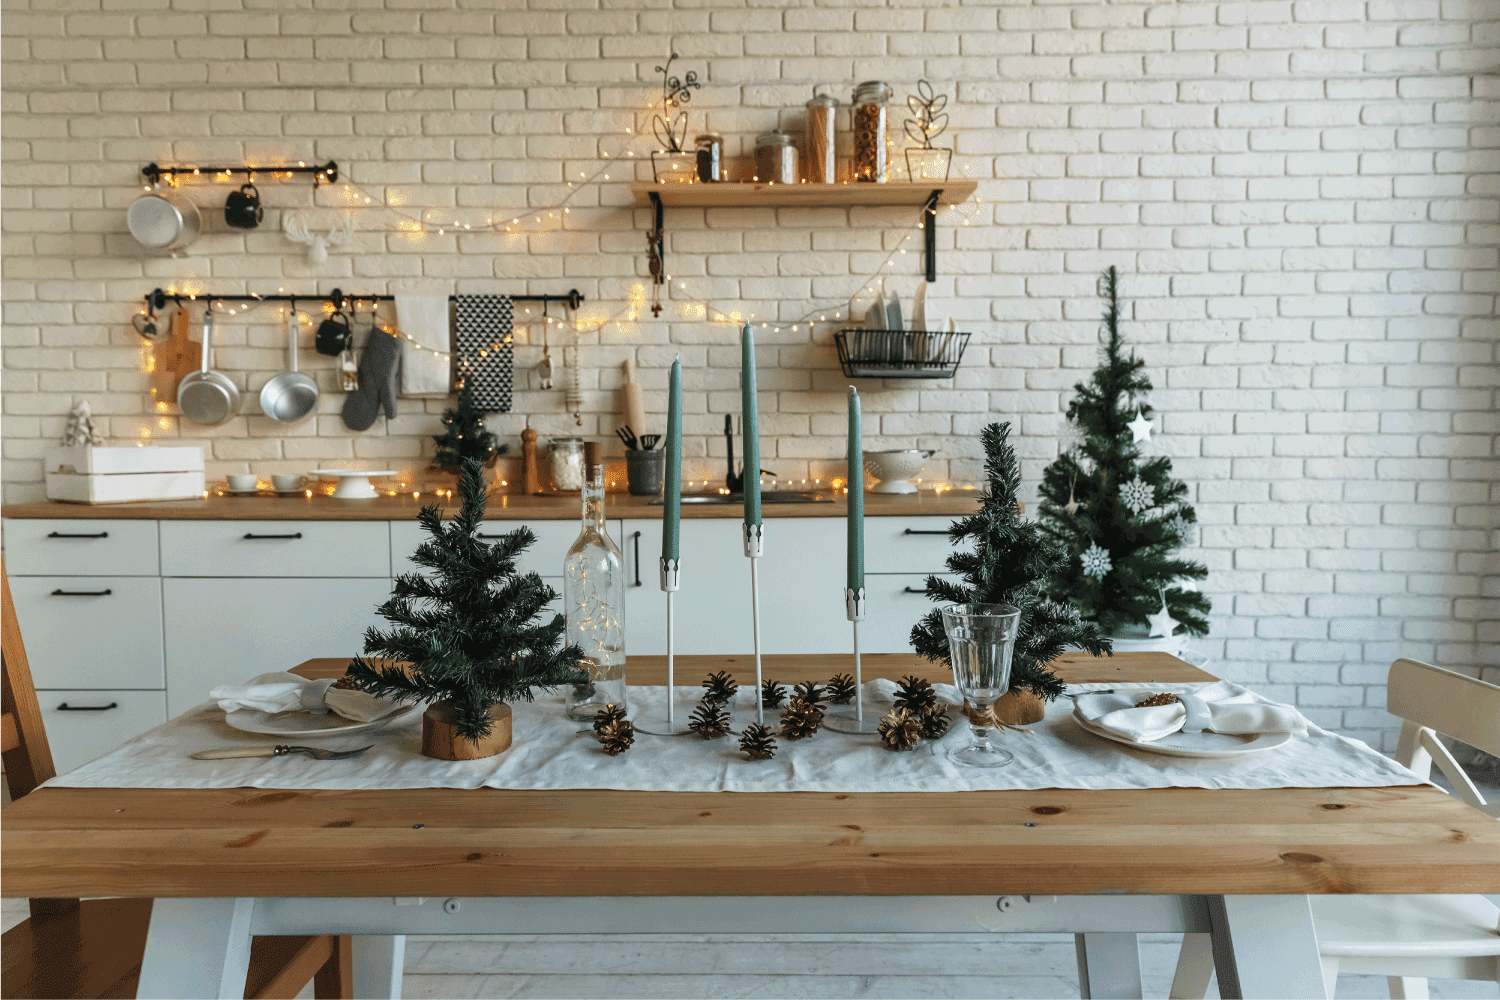 New Year and Christmas. Festive kitchen in Christmas decorations. Candles, spruce branches, wooden stands, table laying